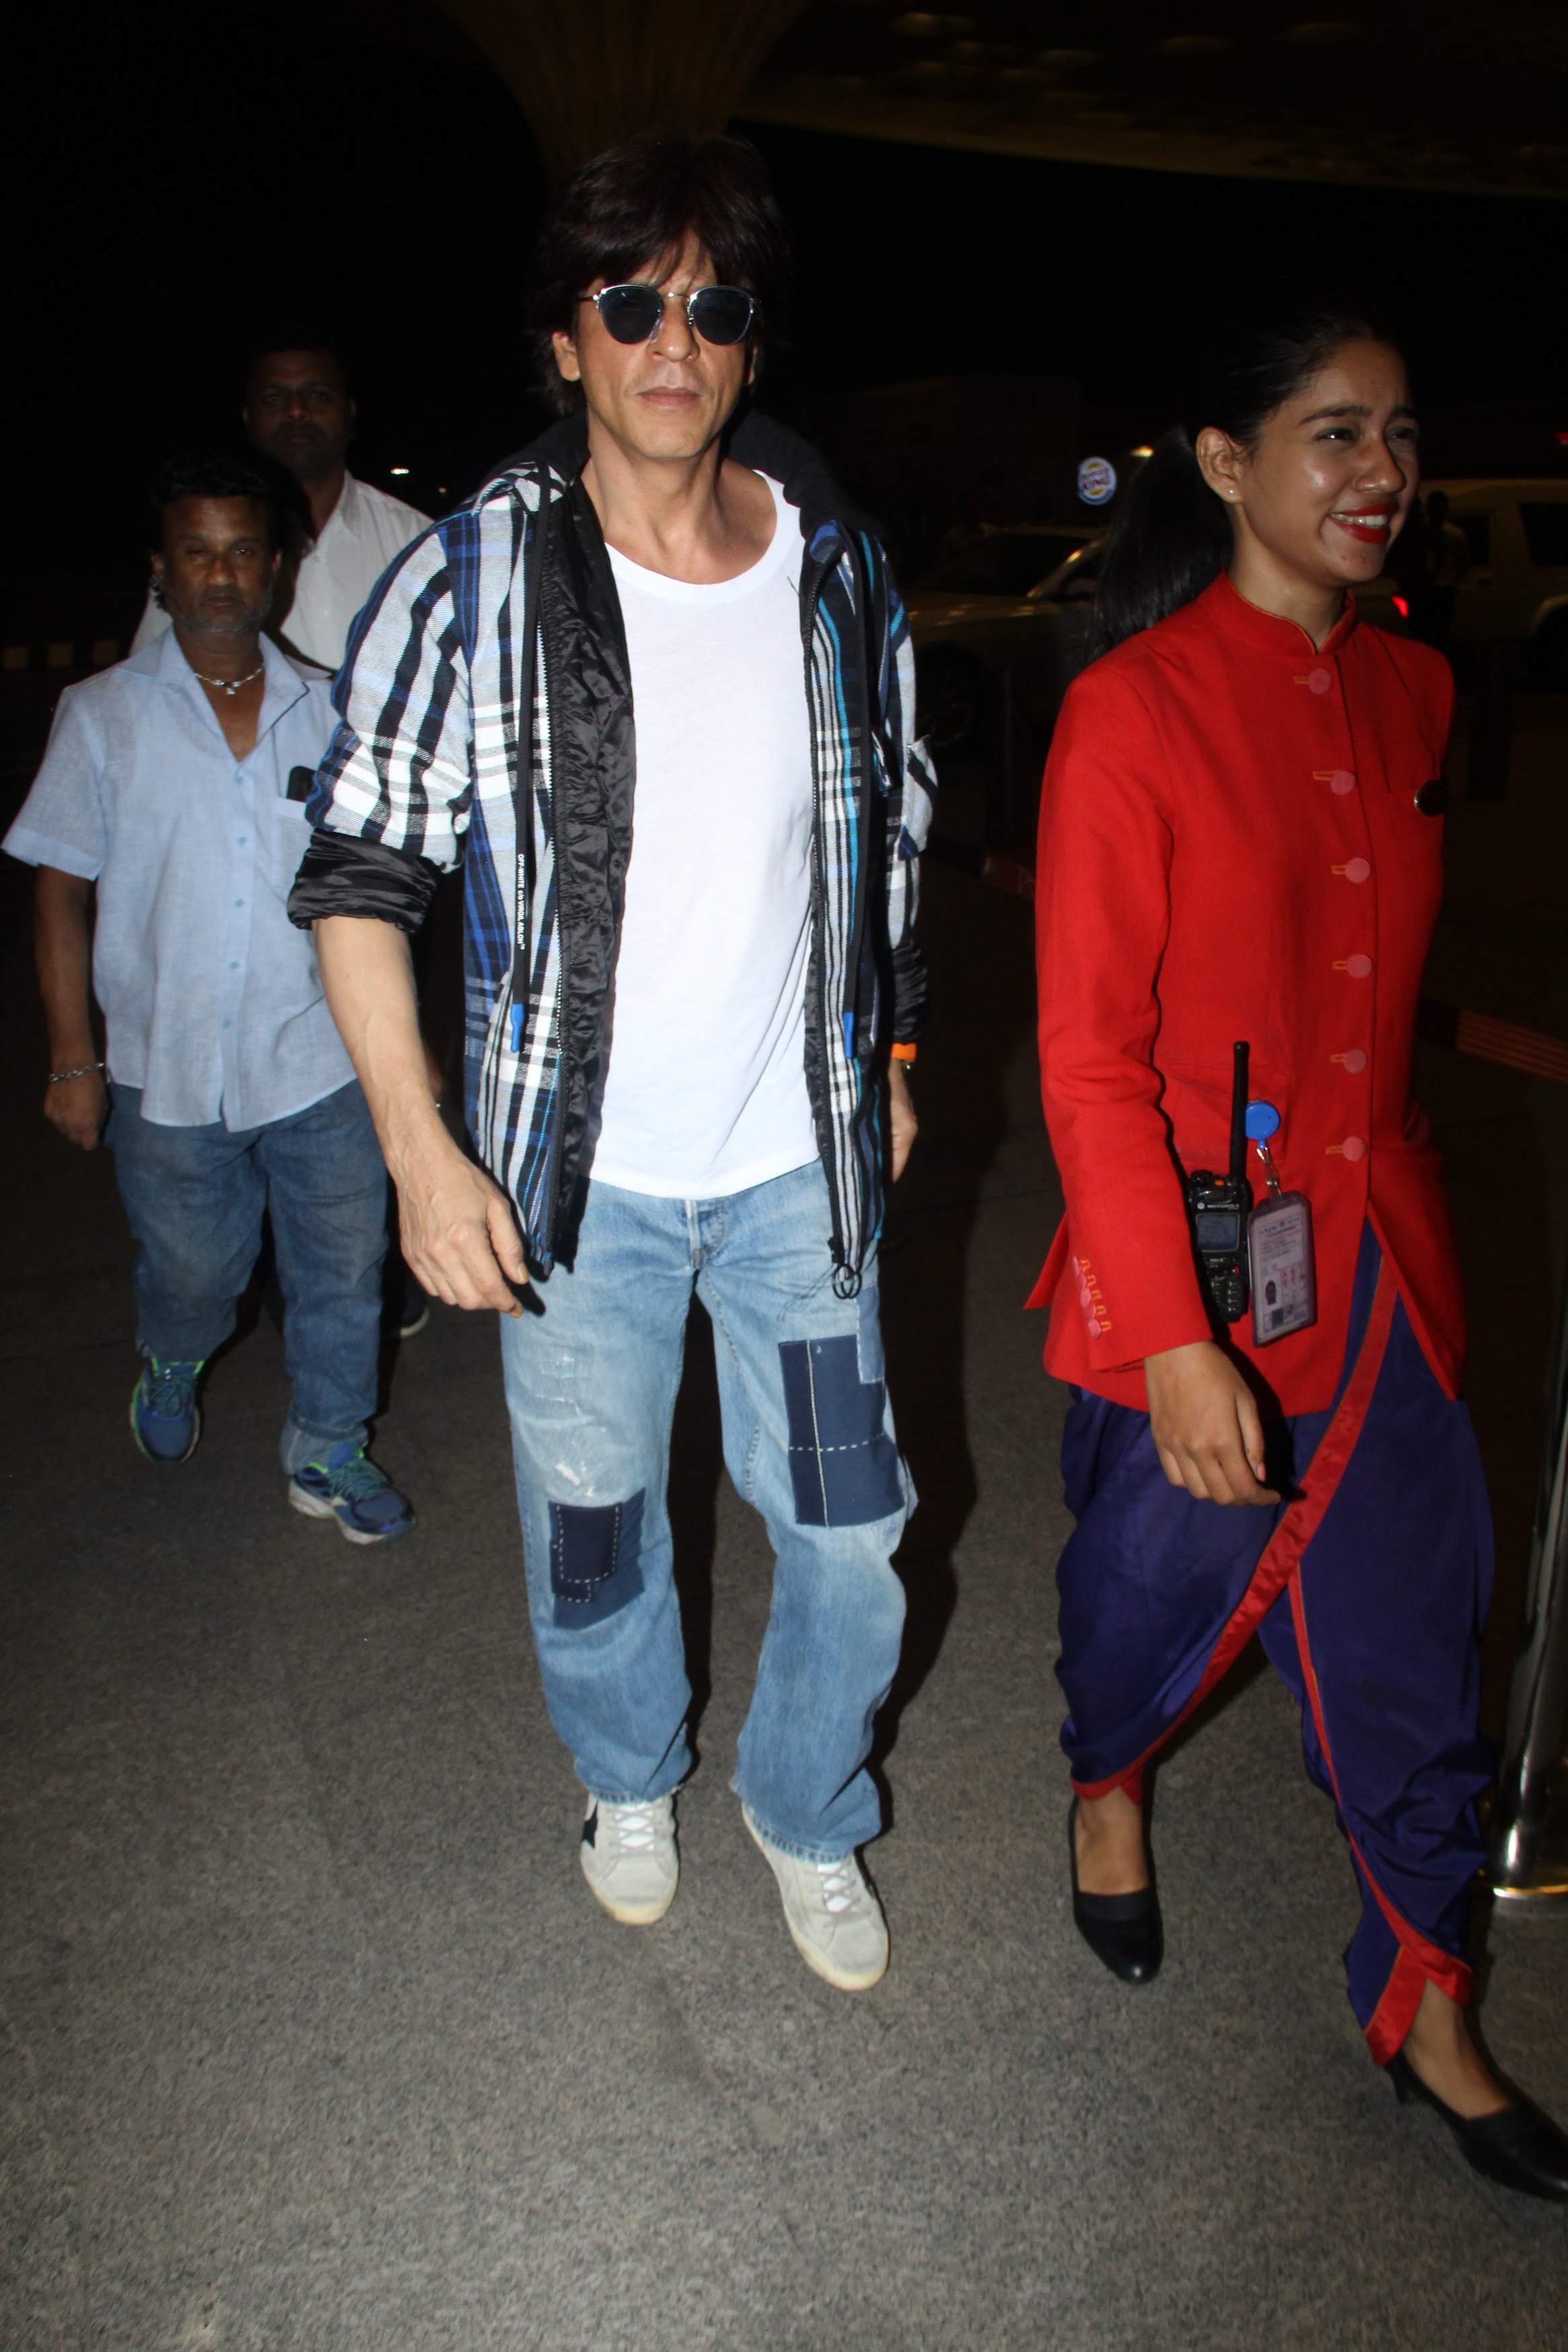 Hey, Shah Rukh Khan! What's with your obsession over military pants?